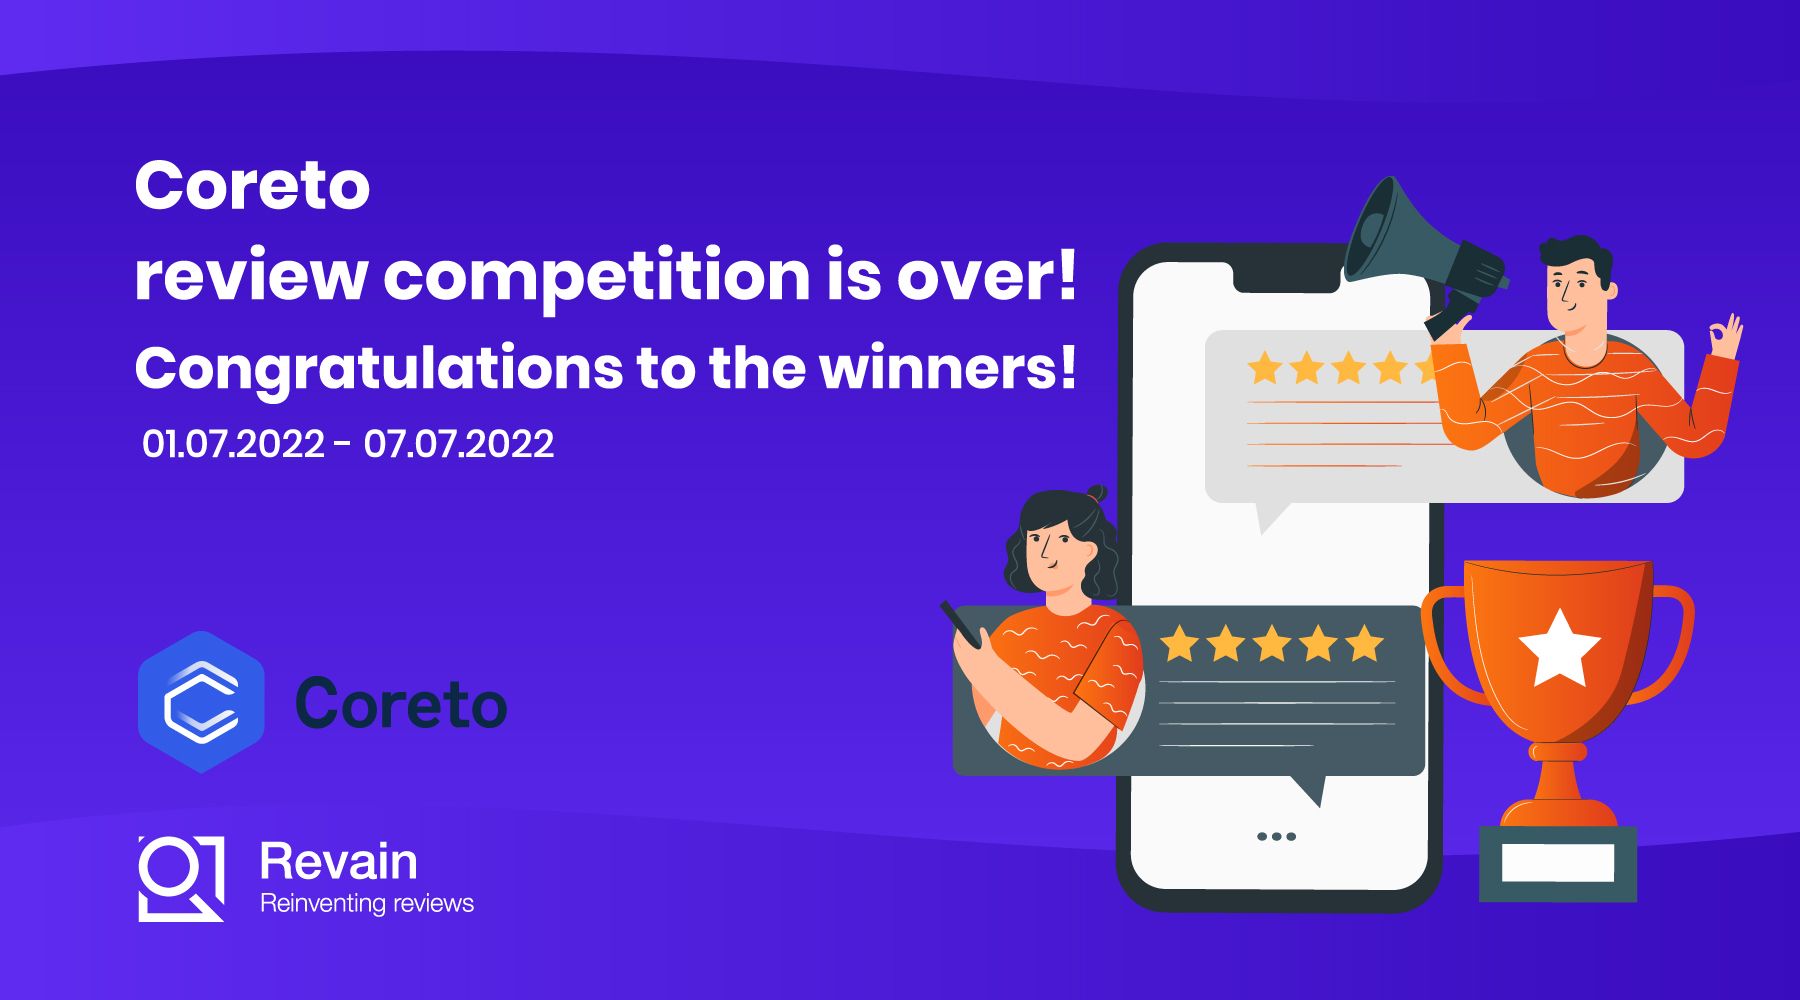 Coreto review competition is over!